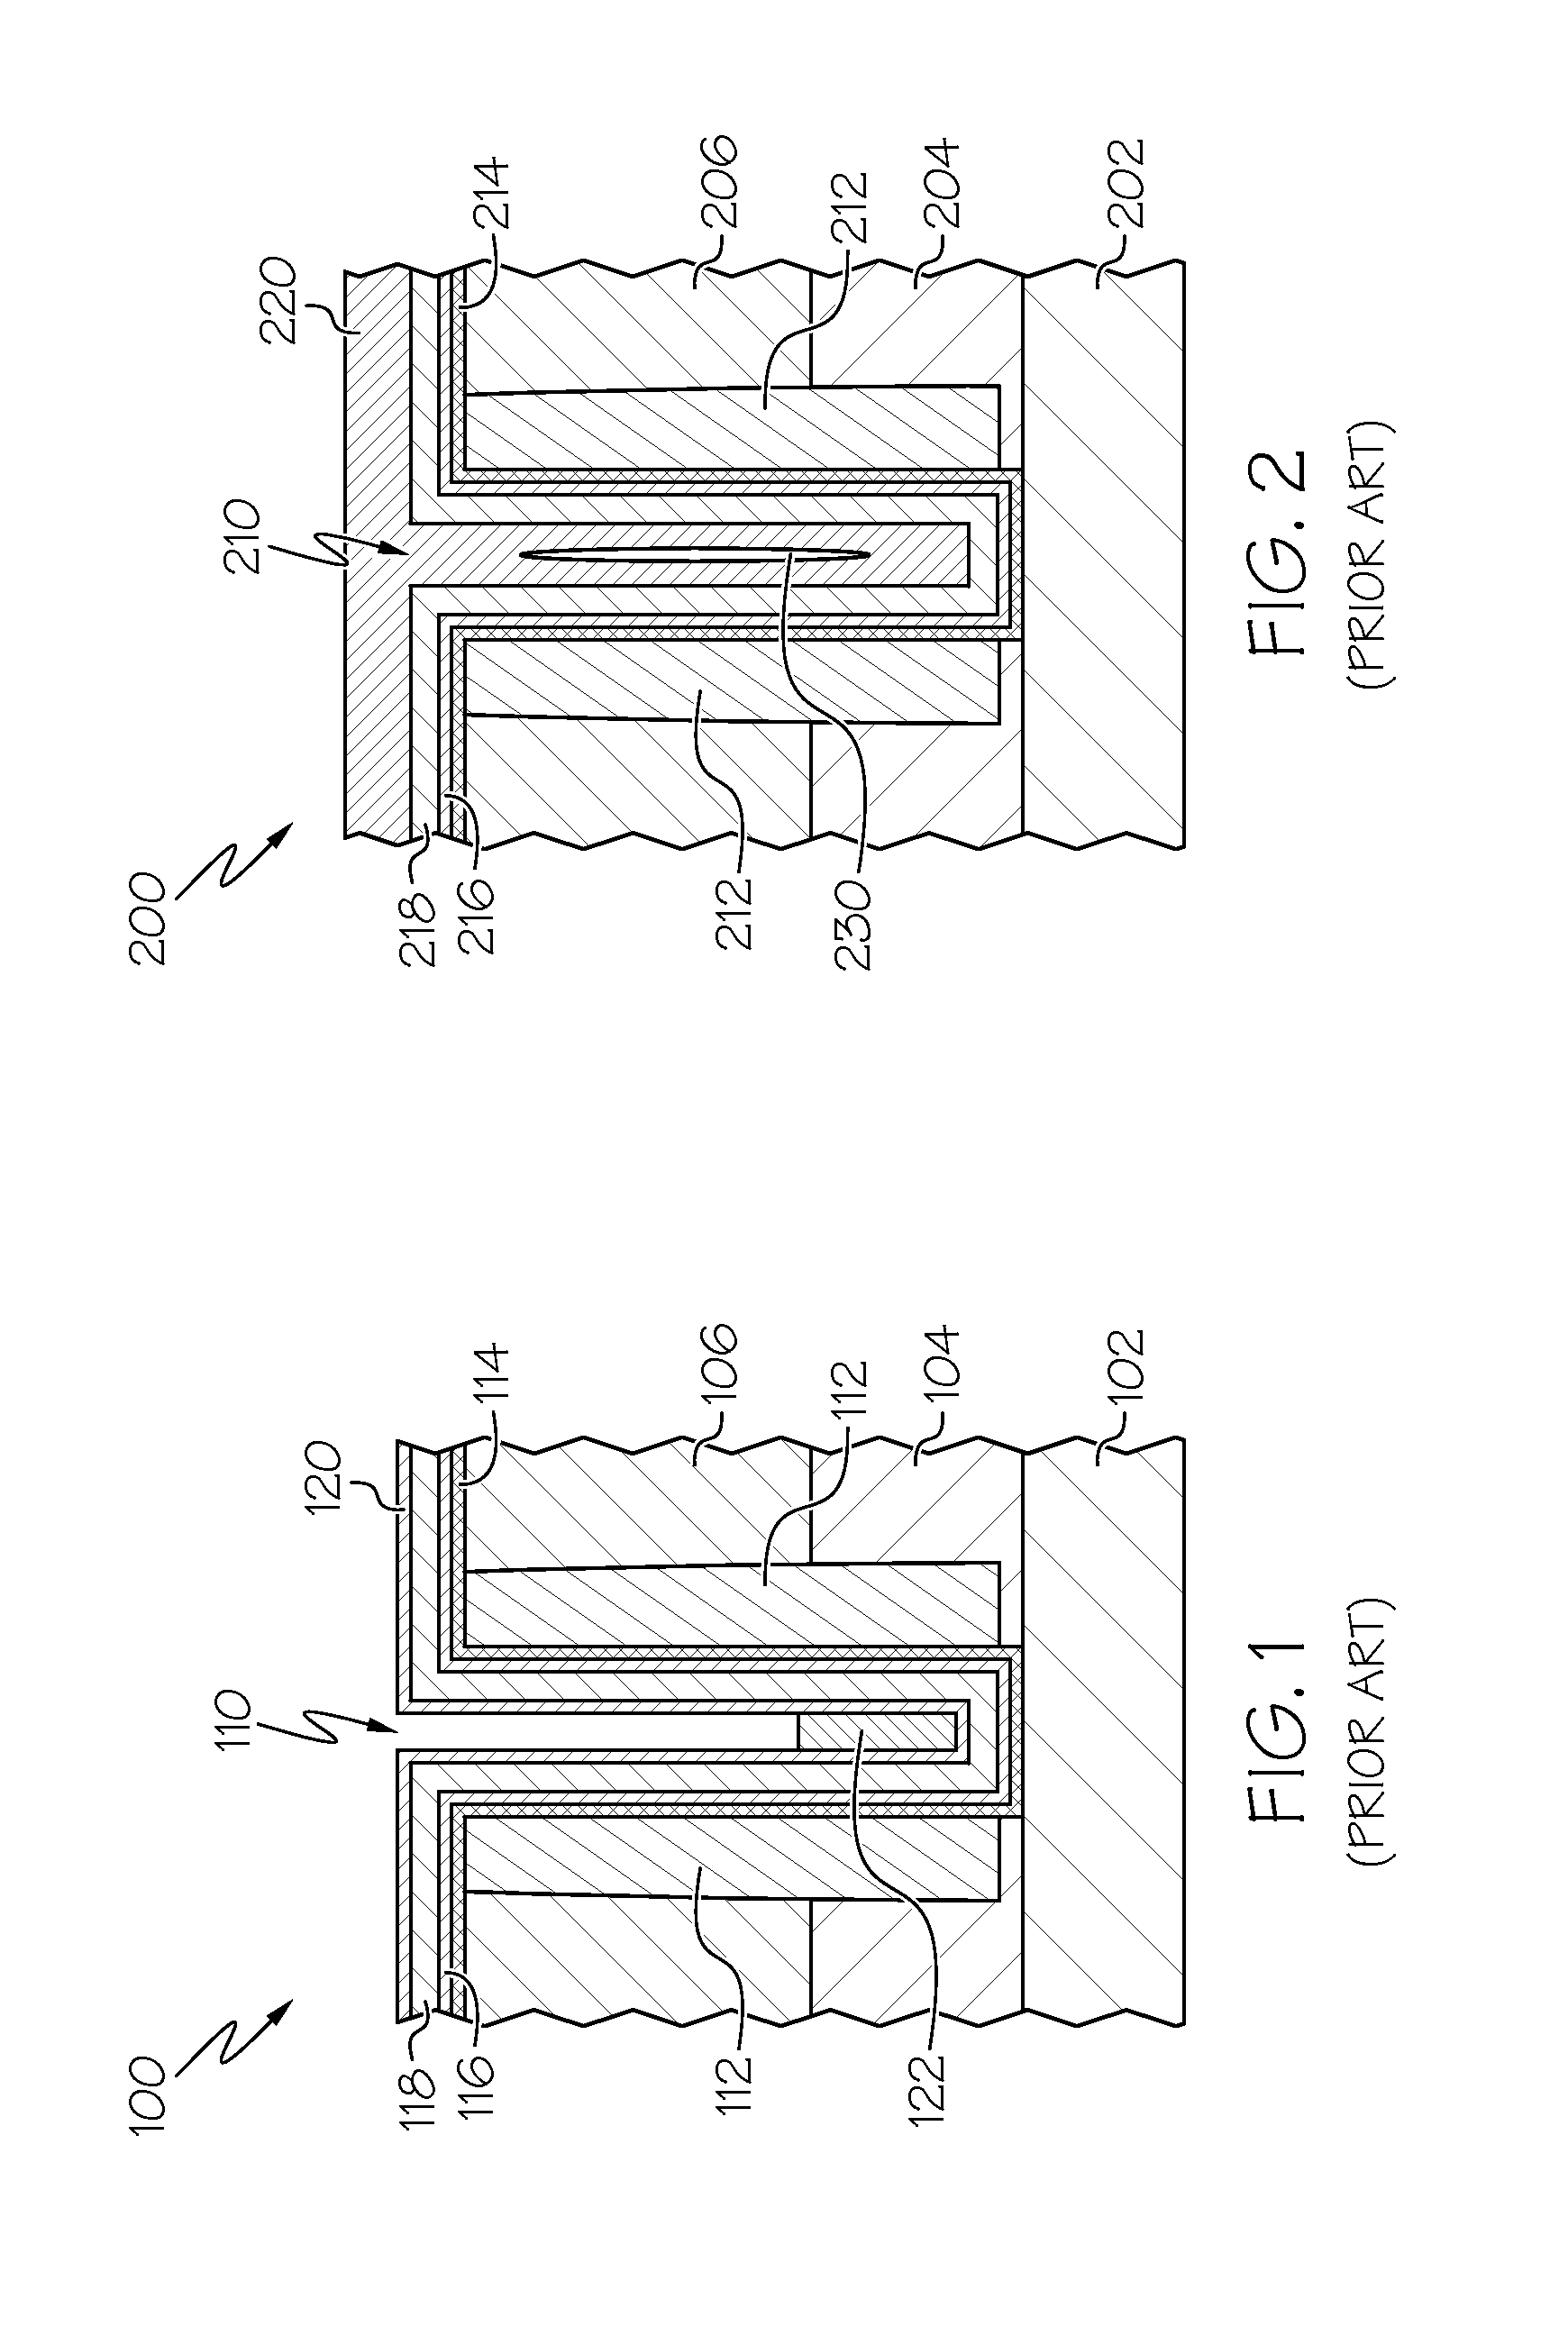 Selective growth of a work-function metal in a replacement metal gate of a semiconductor device